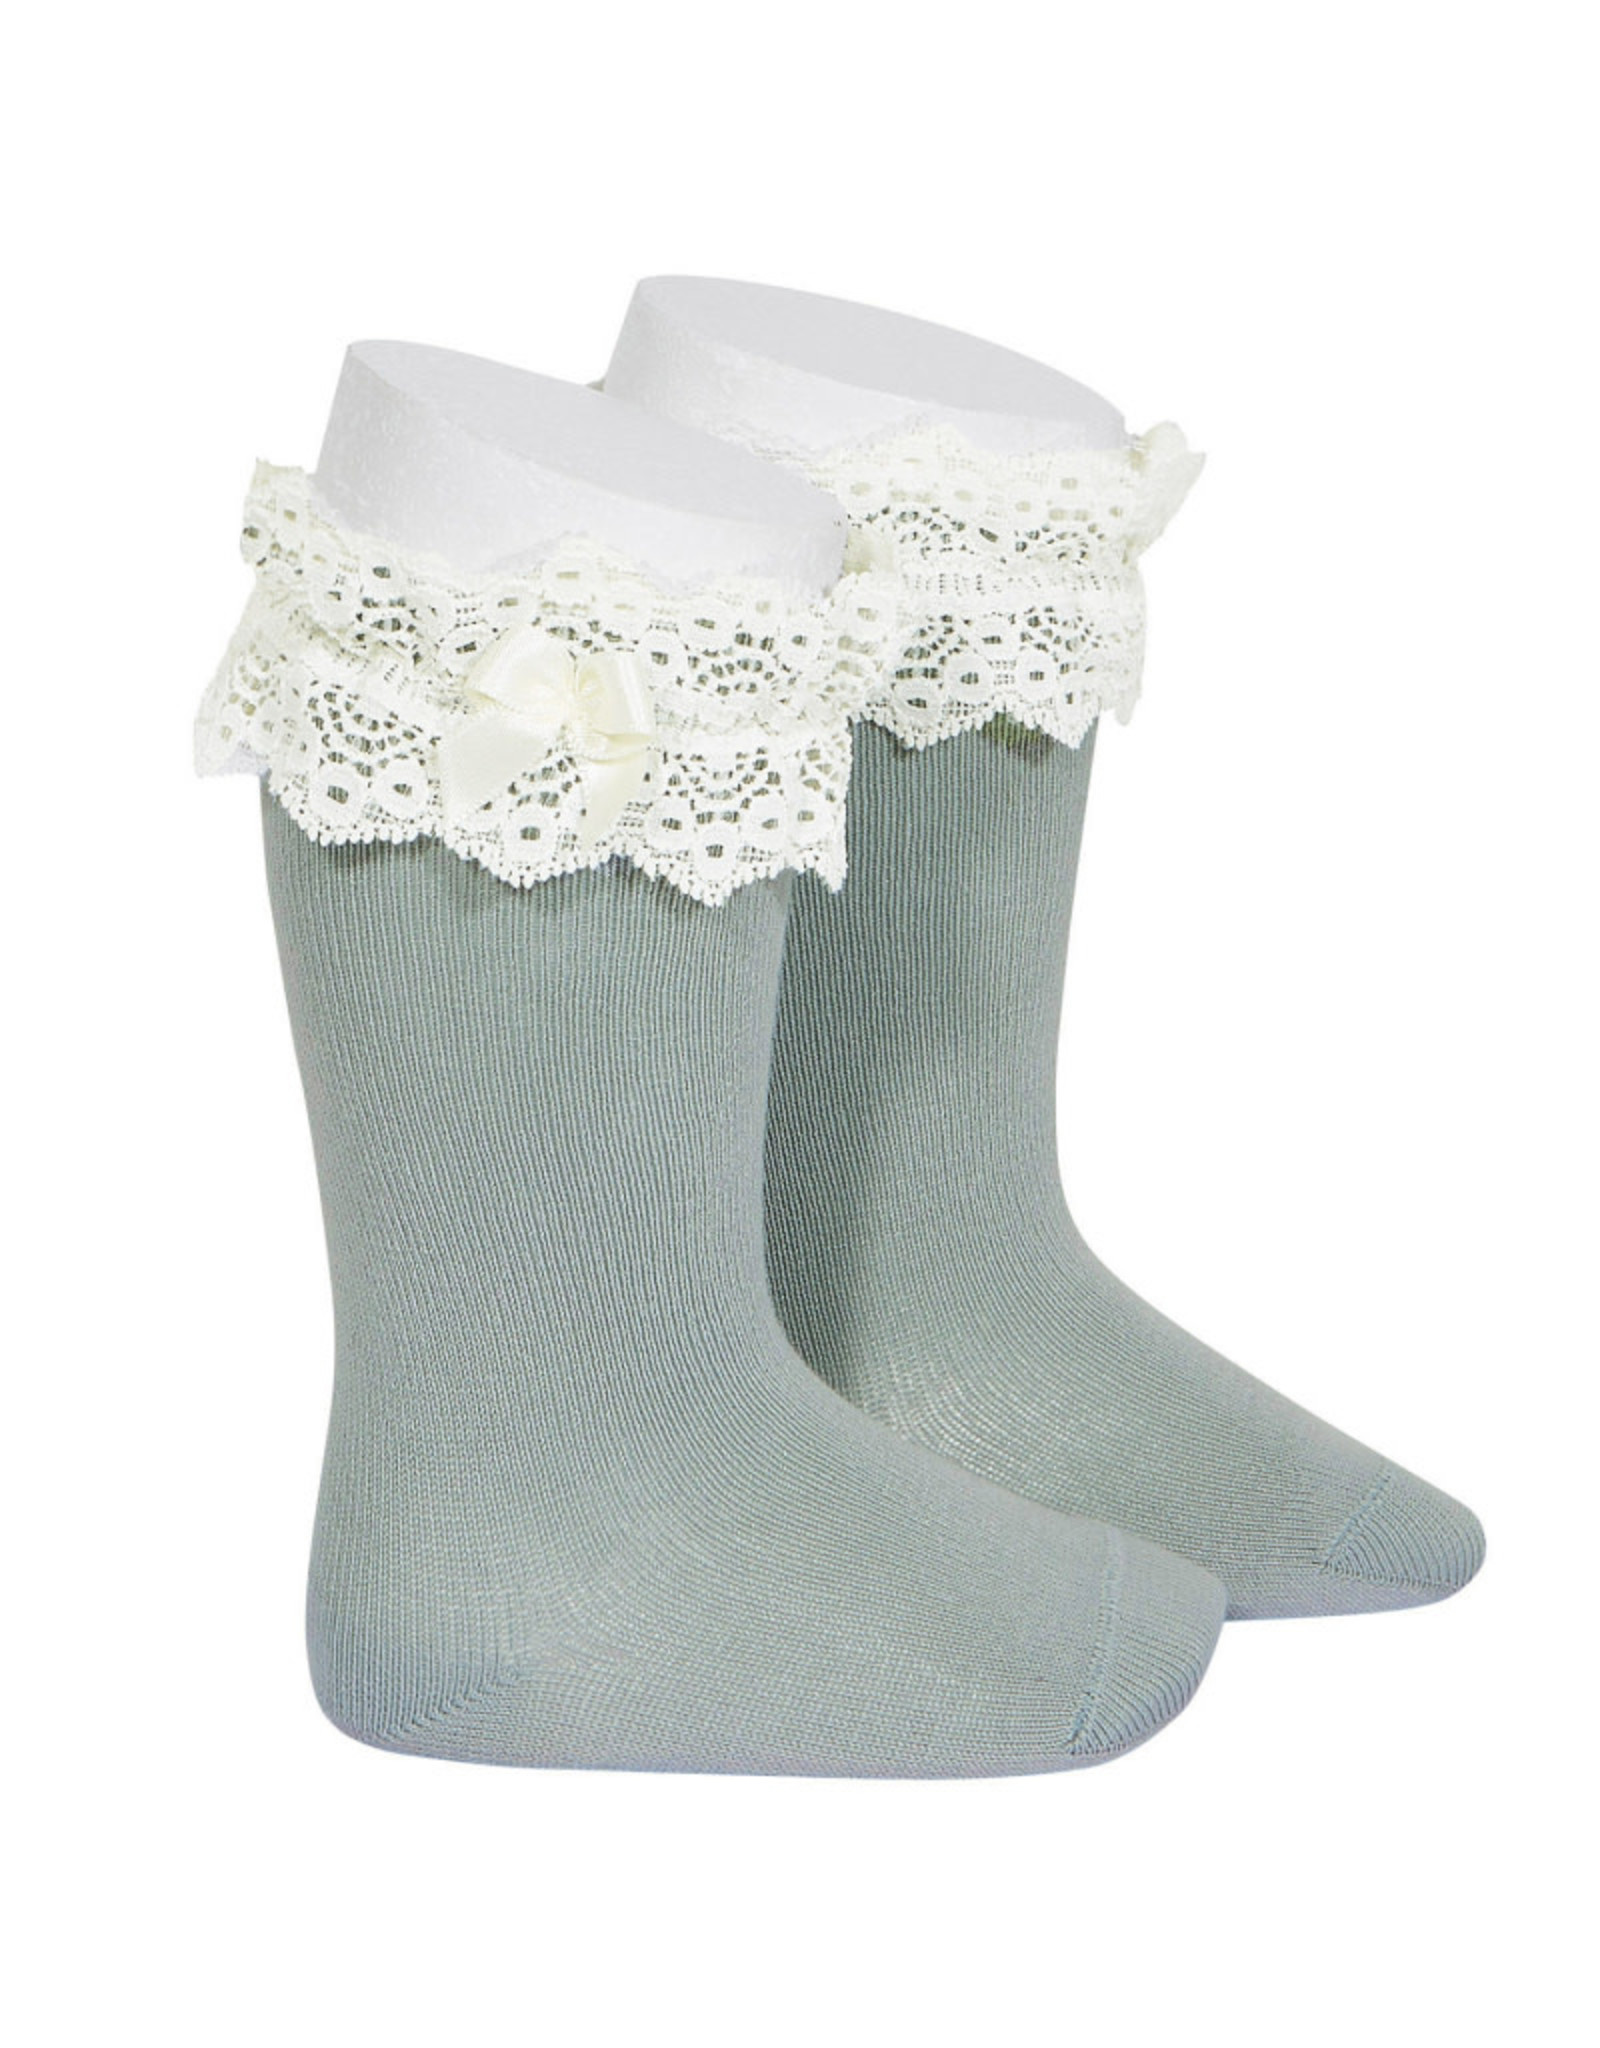 CONDOR Dry Green Lace Trim Socks with Bow